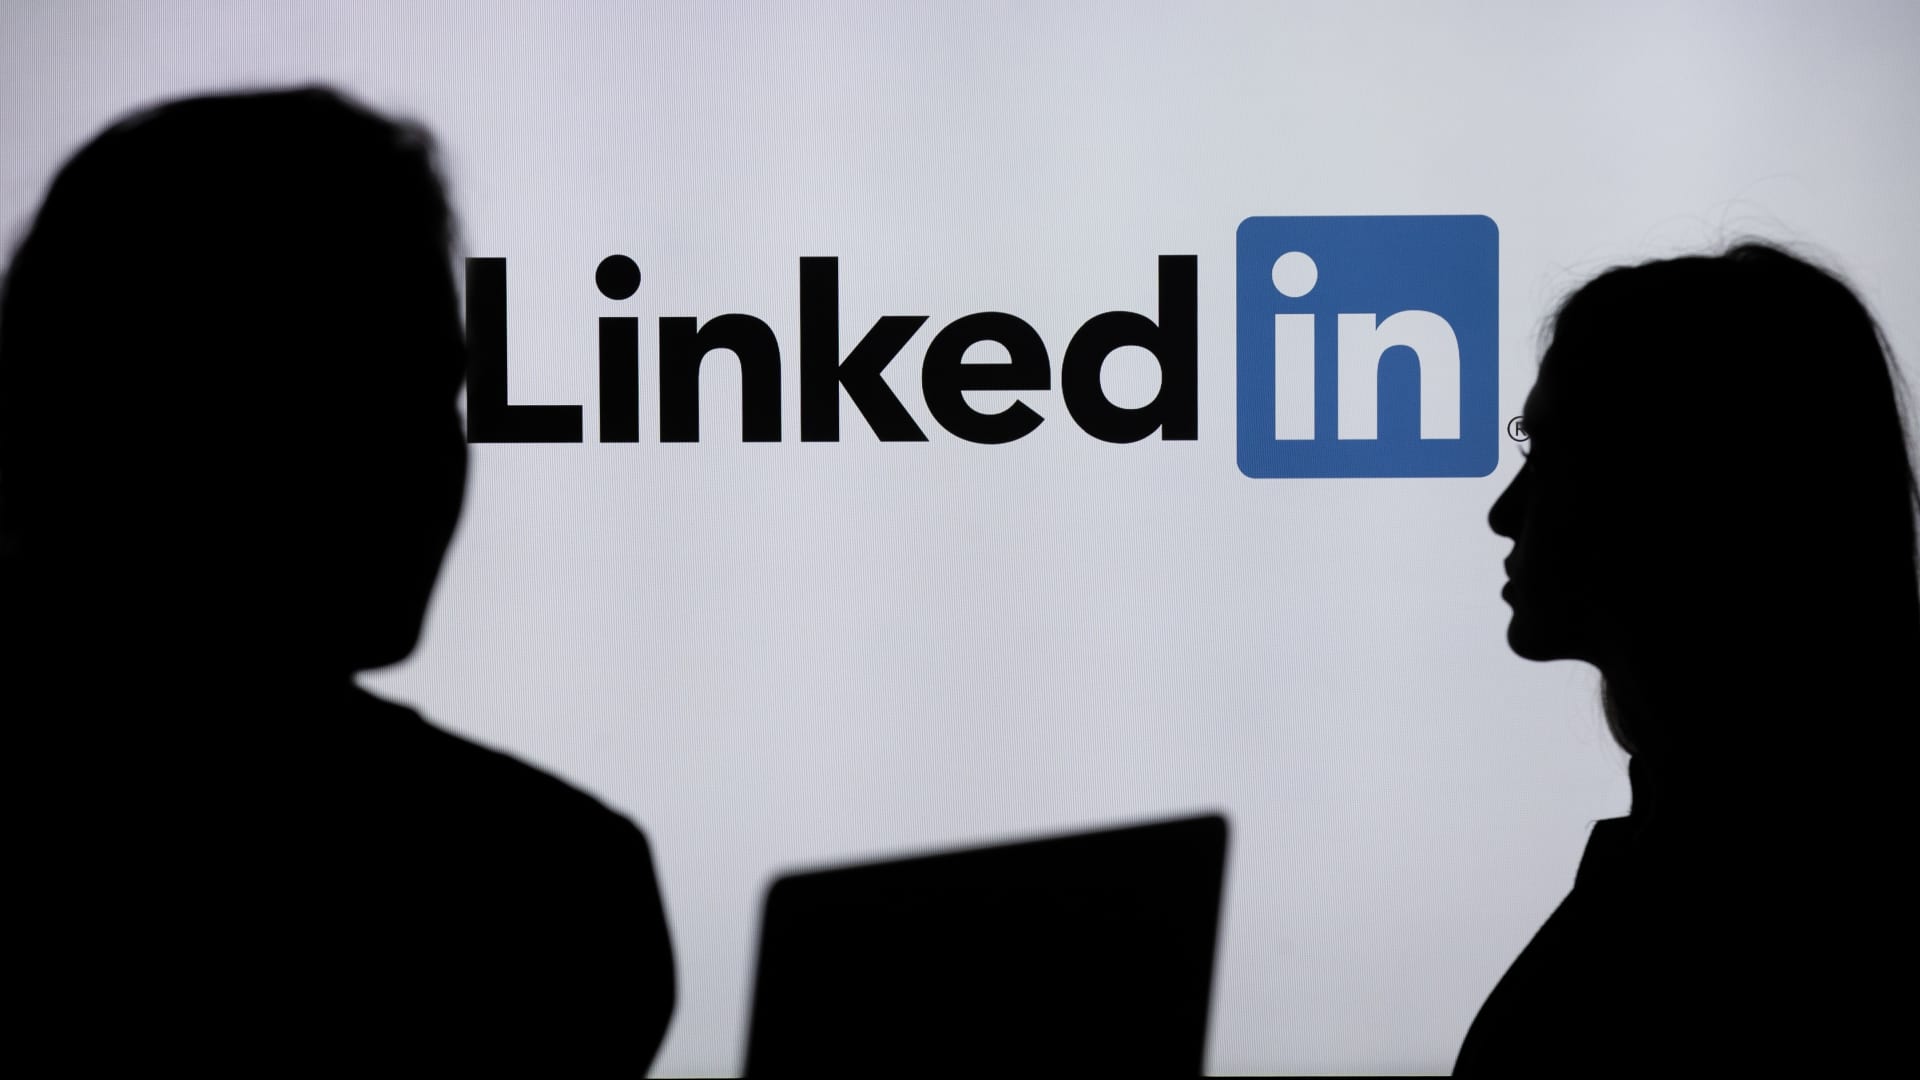 LinkedIn has a fake account problem it’s trying to fix. Real users are part of the solution